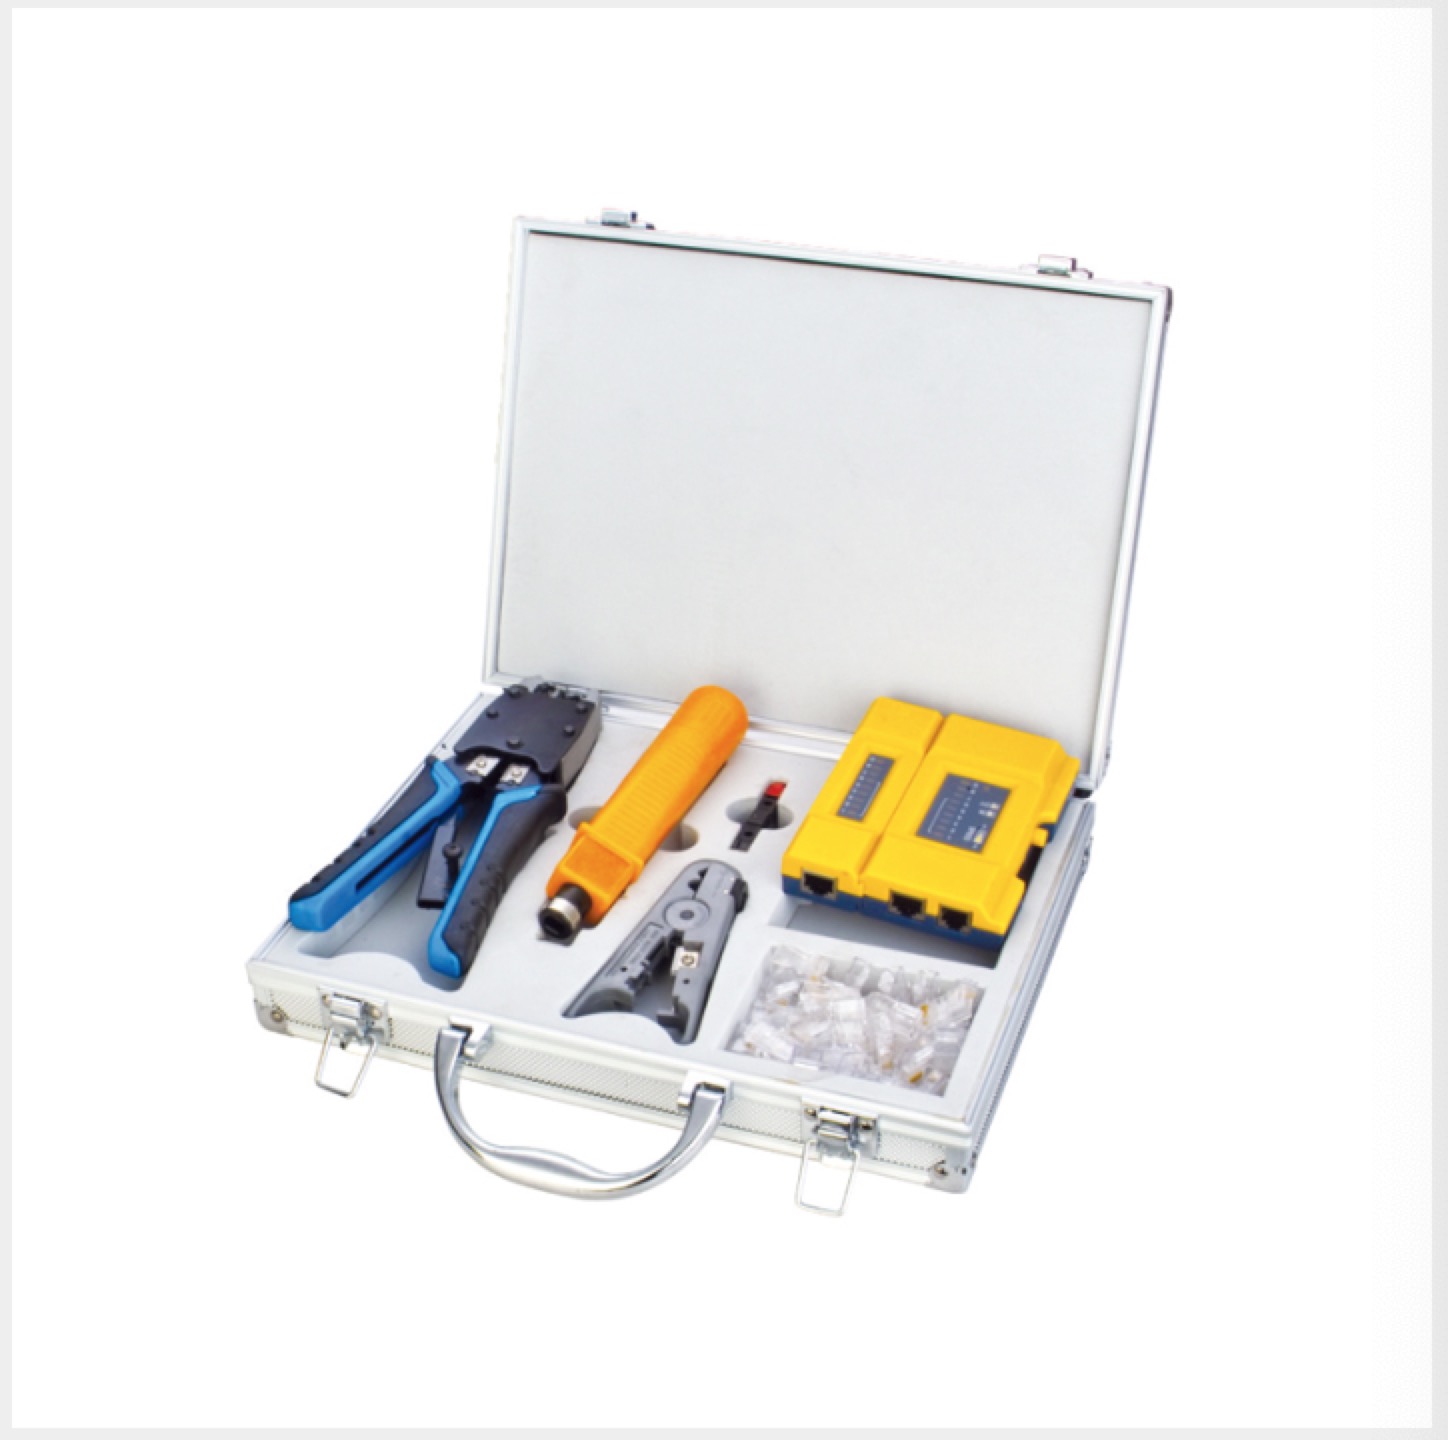 Tool Kit for Copper Cabling system